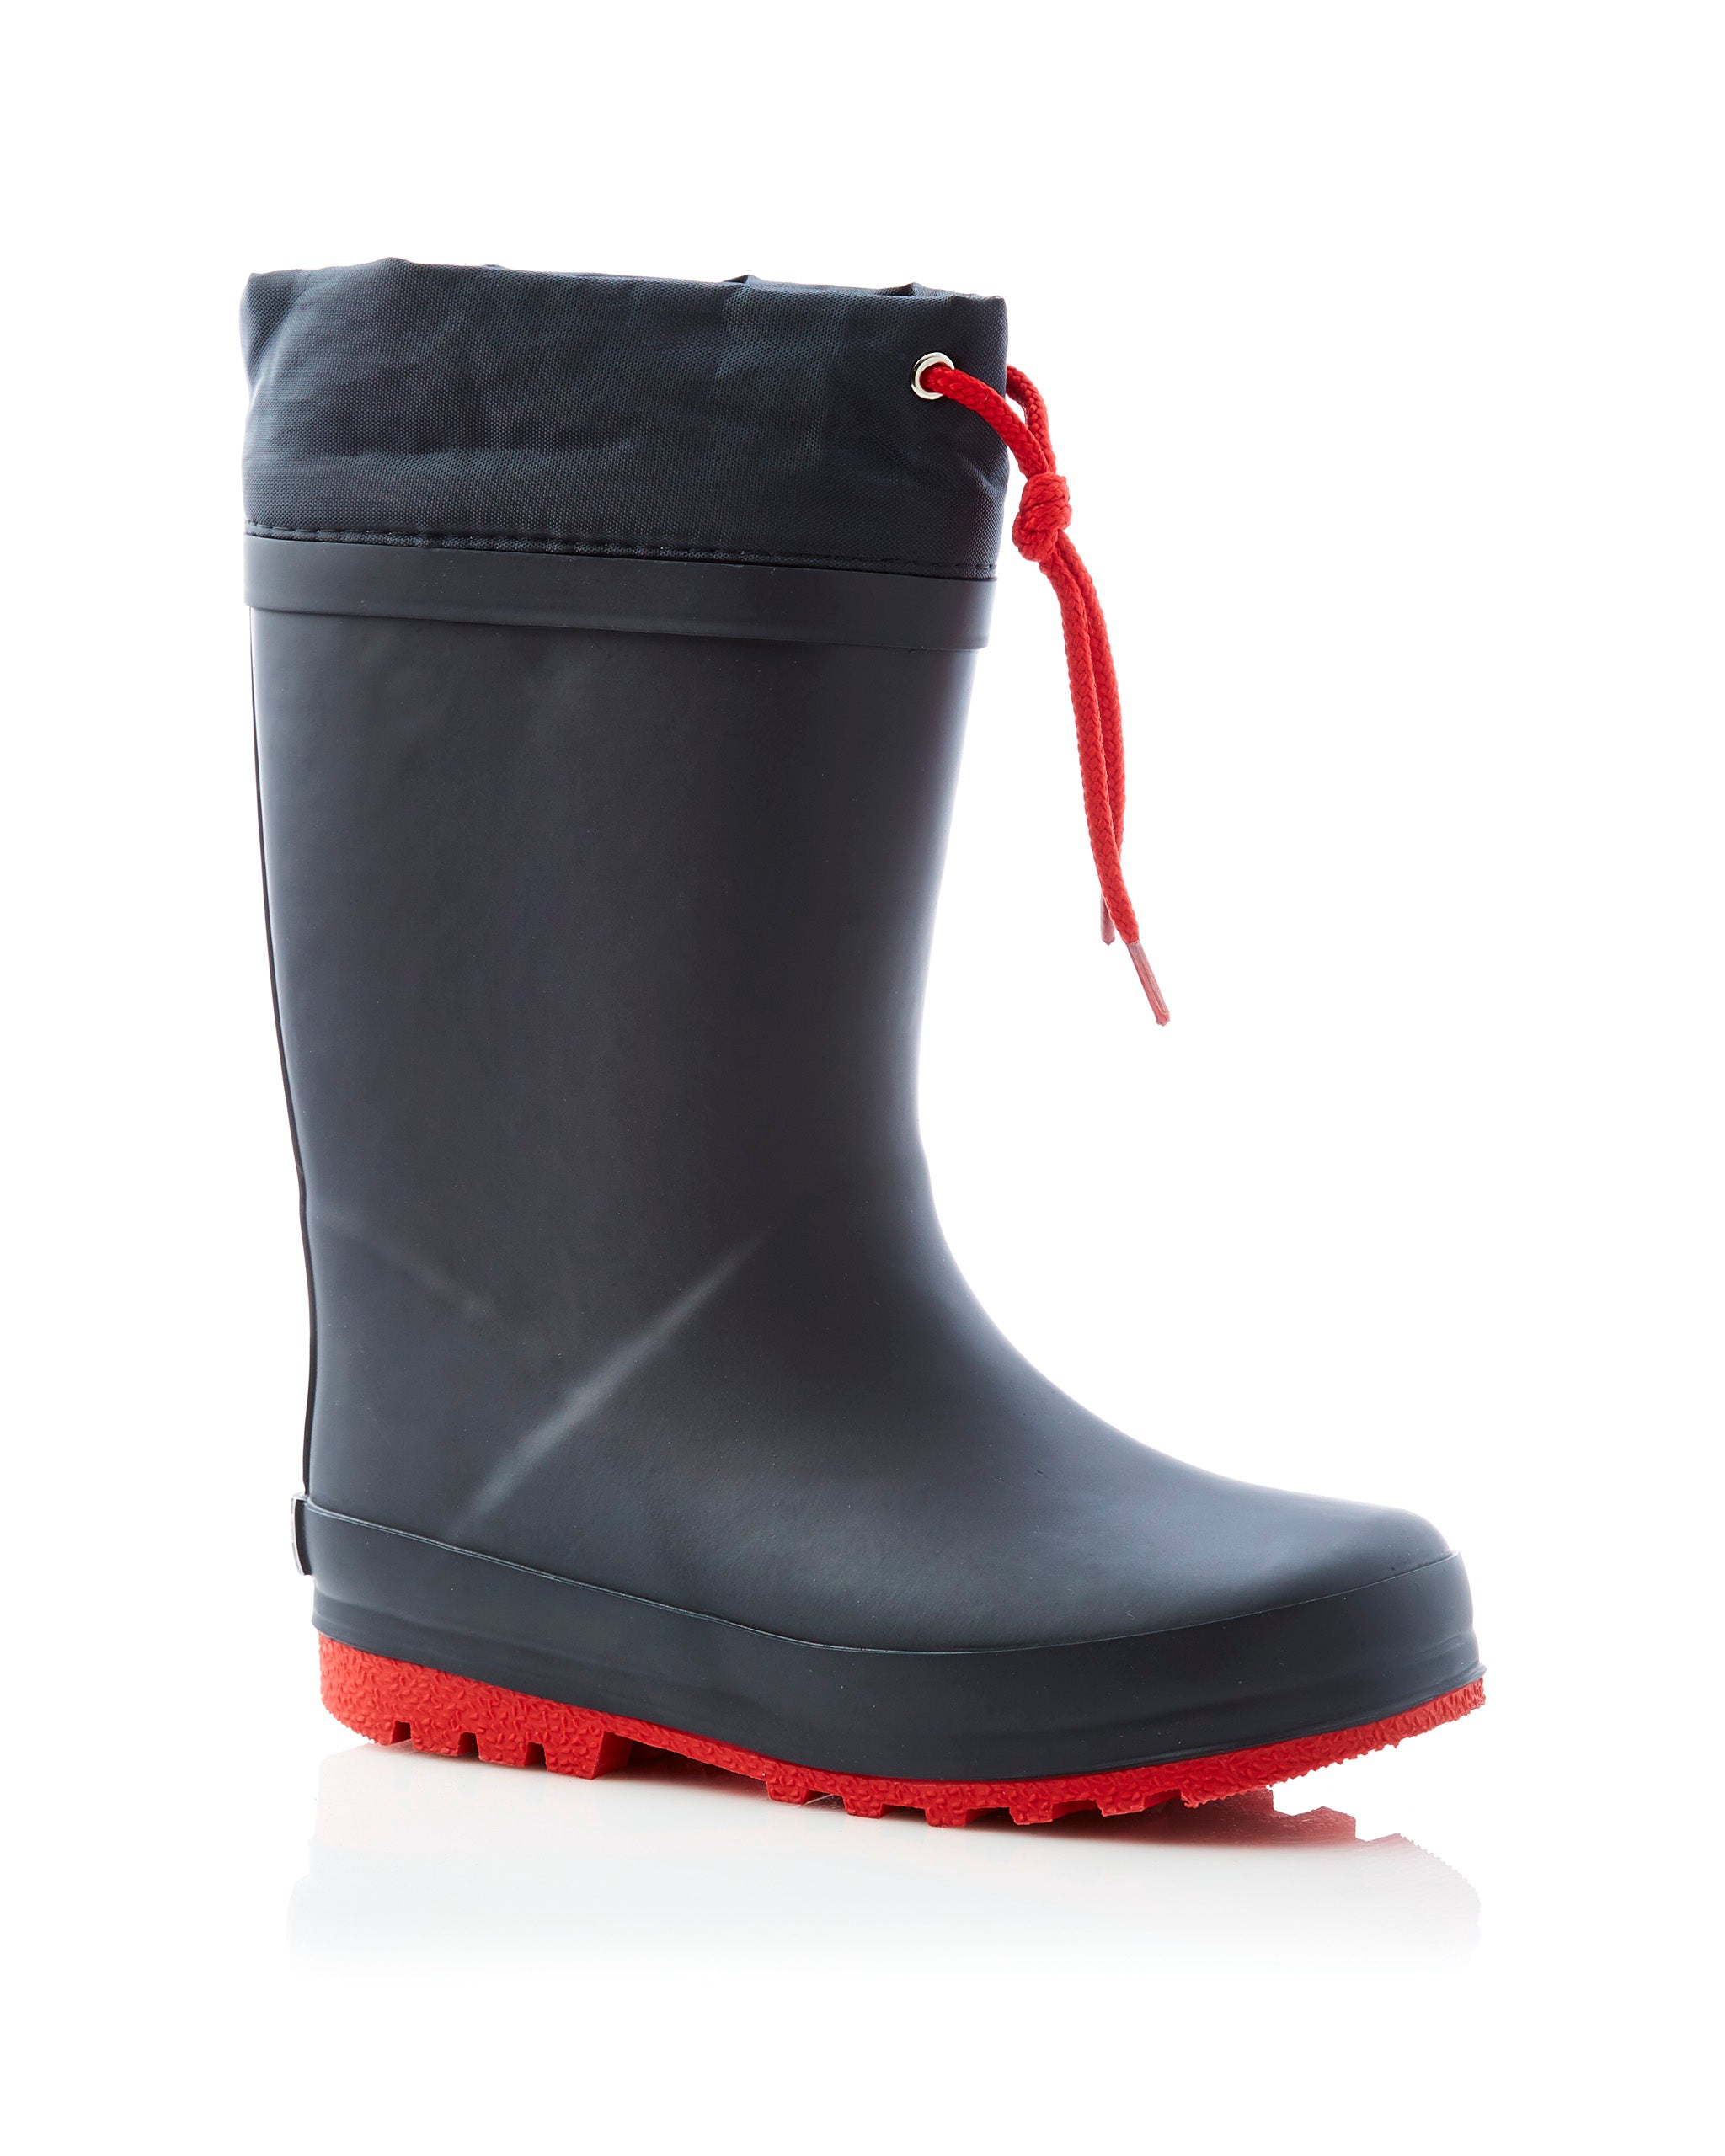 GATOR GUMBOOT Navy Red side view